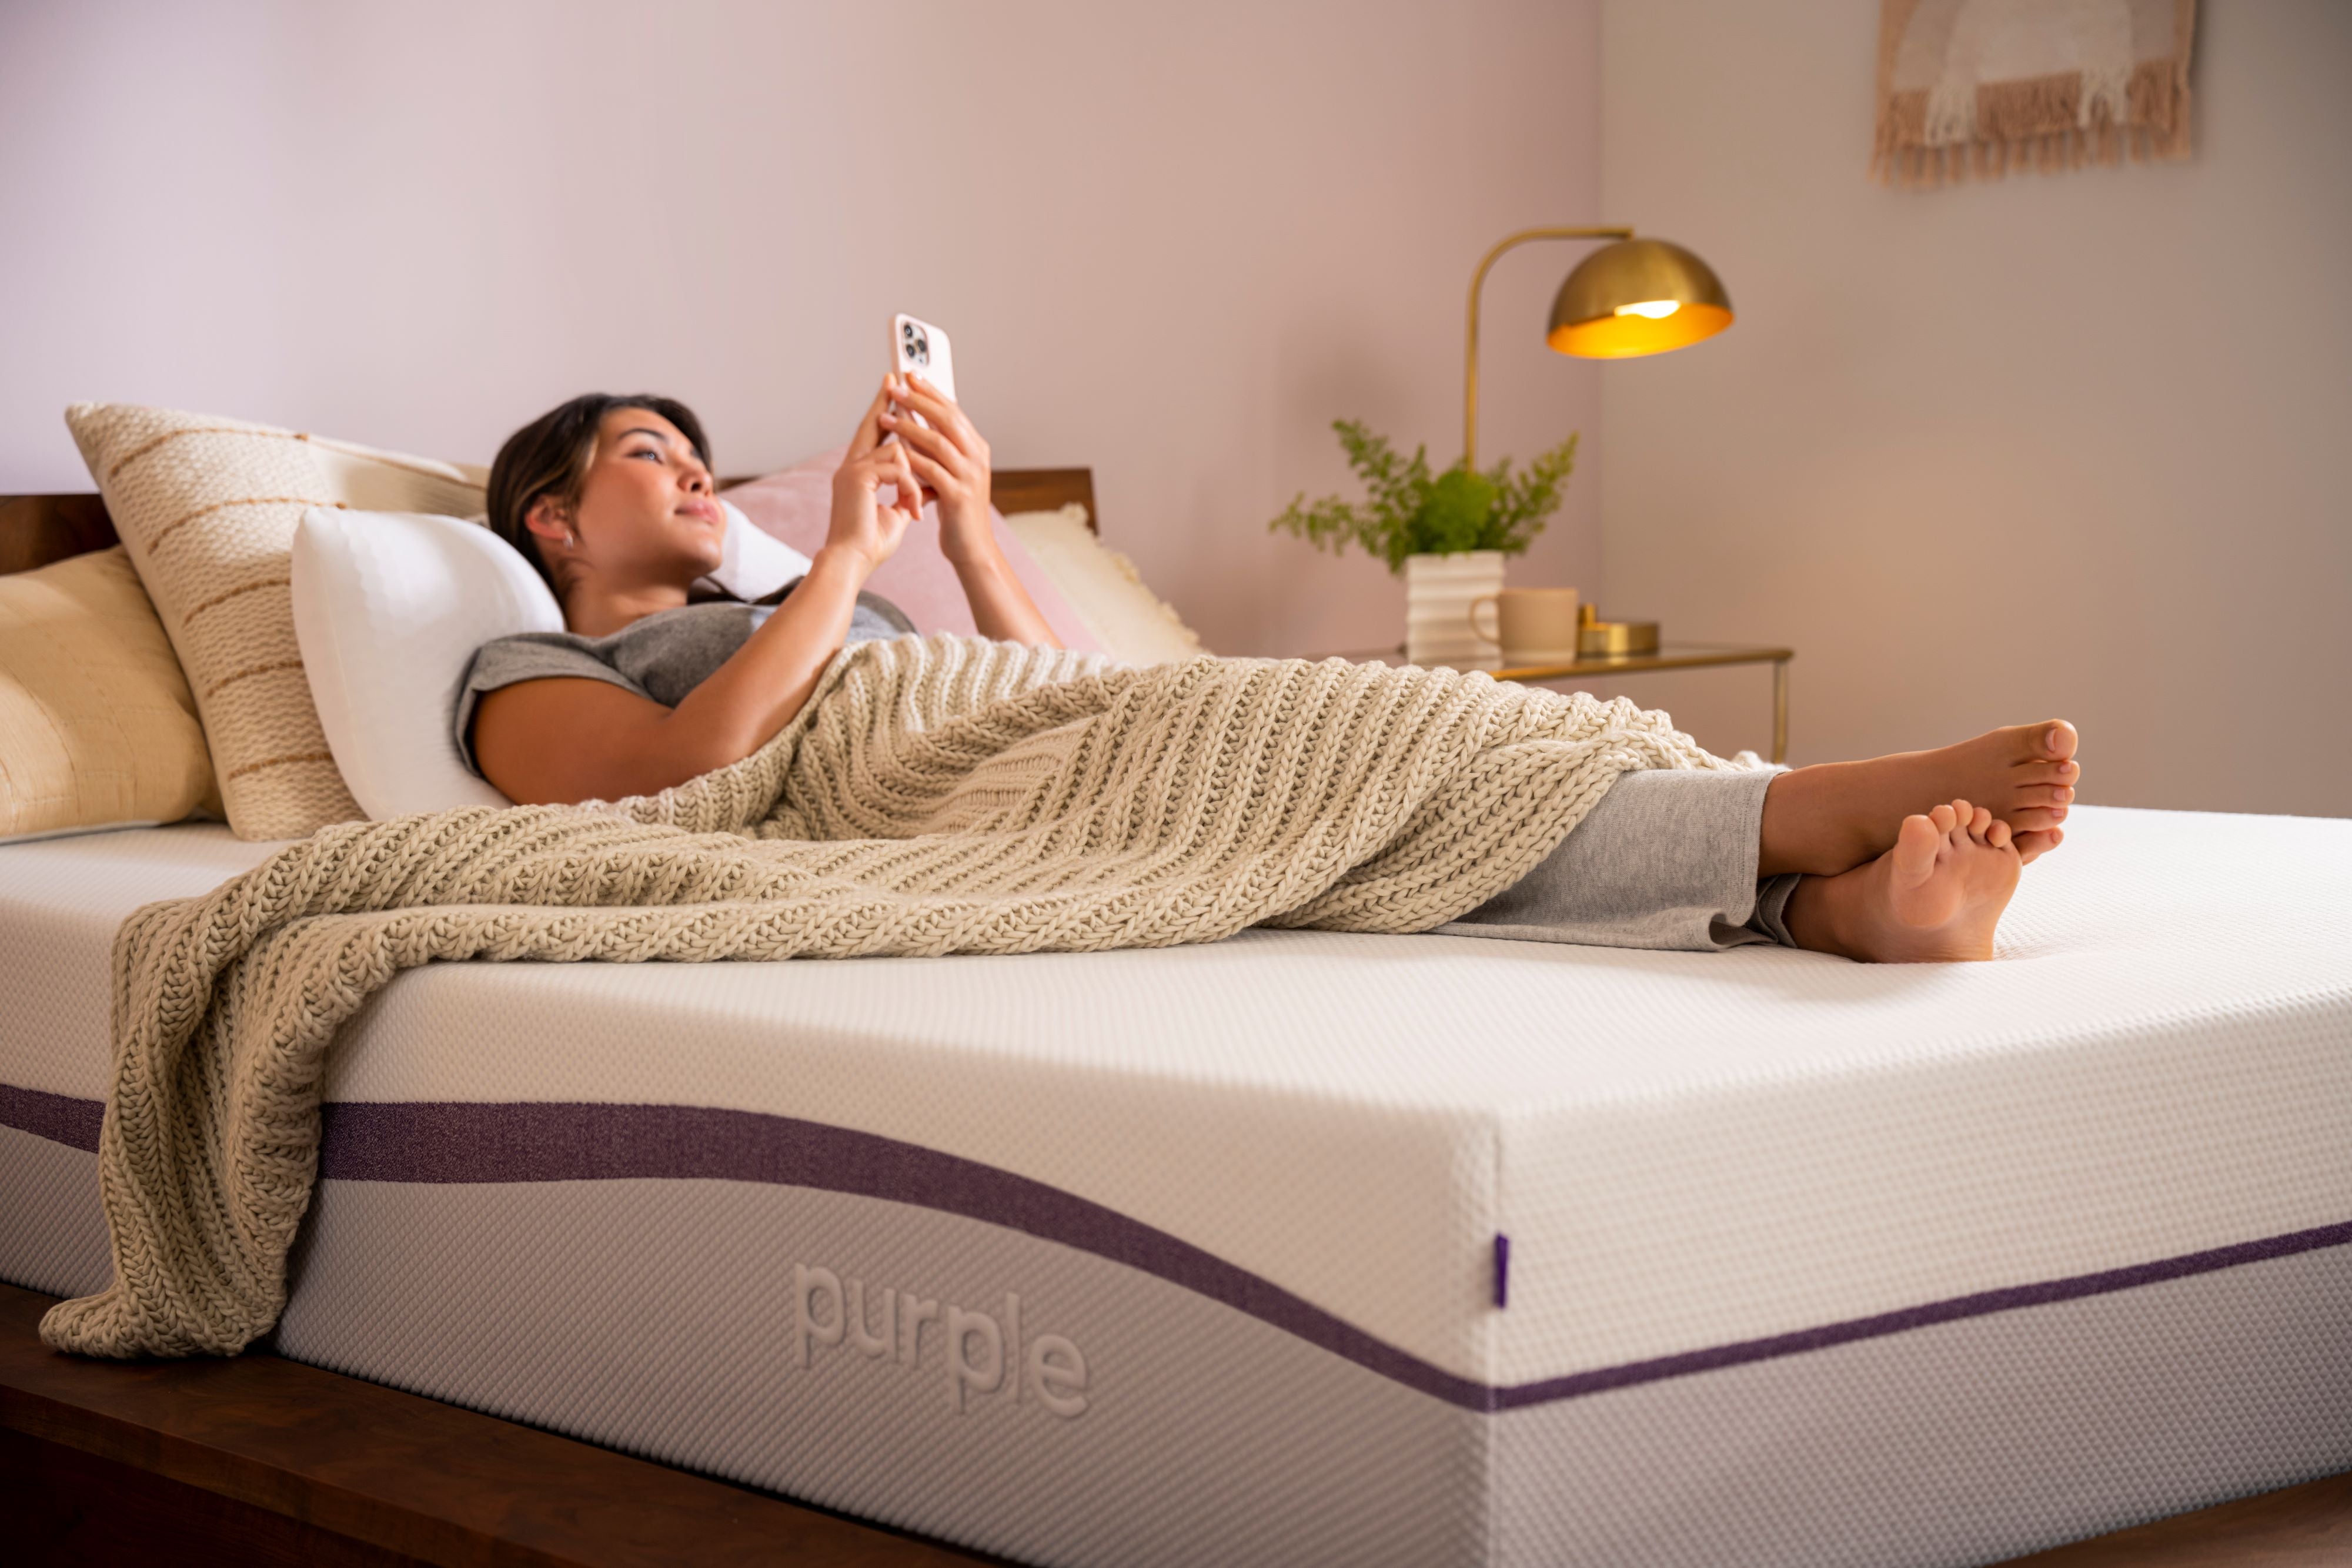 Woman resting on a Purple Plus mattress while checking her phone